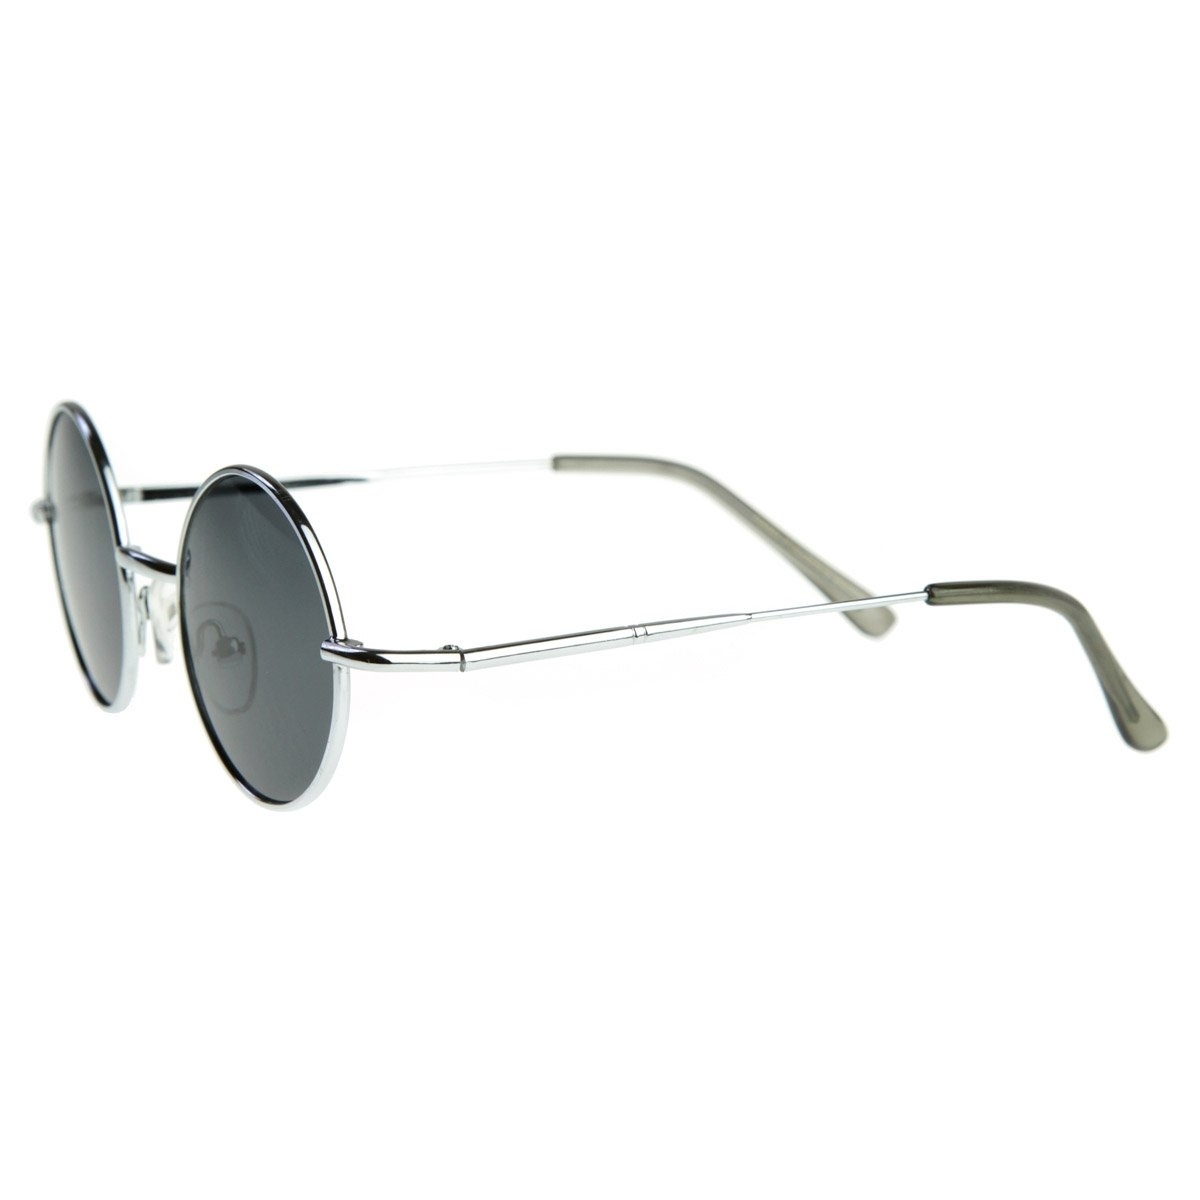 Small Retro-Vintage Style Lennon Inspired Round Metal Circle Sunglasses - Silver Fire